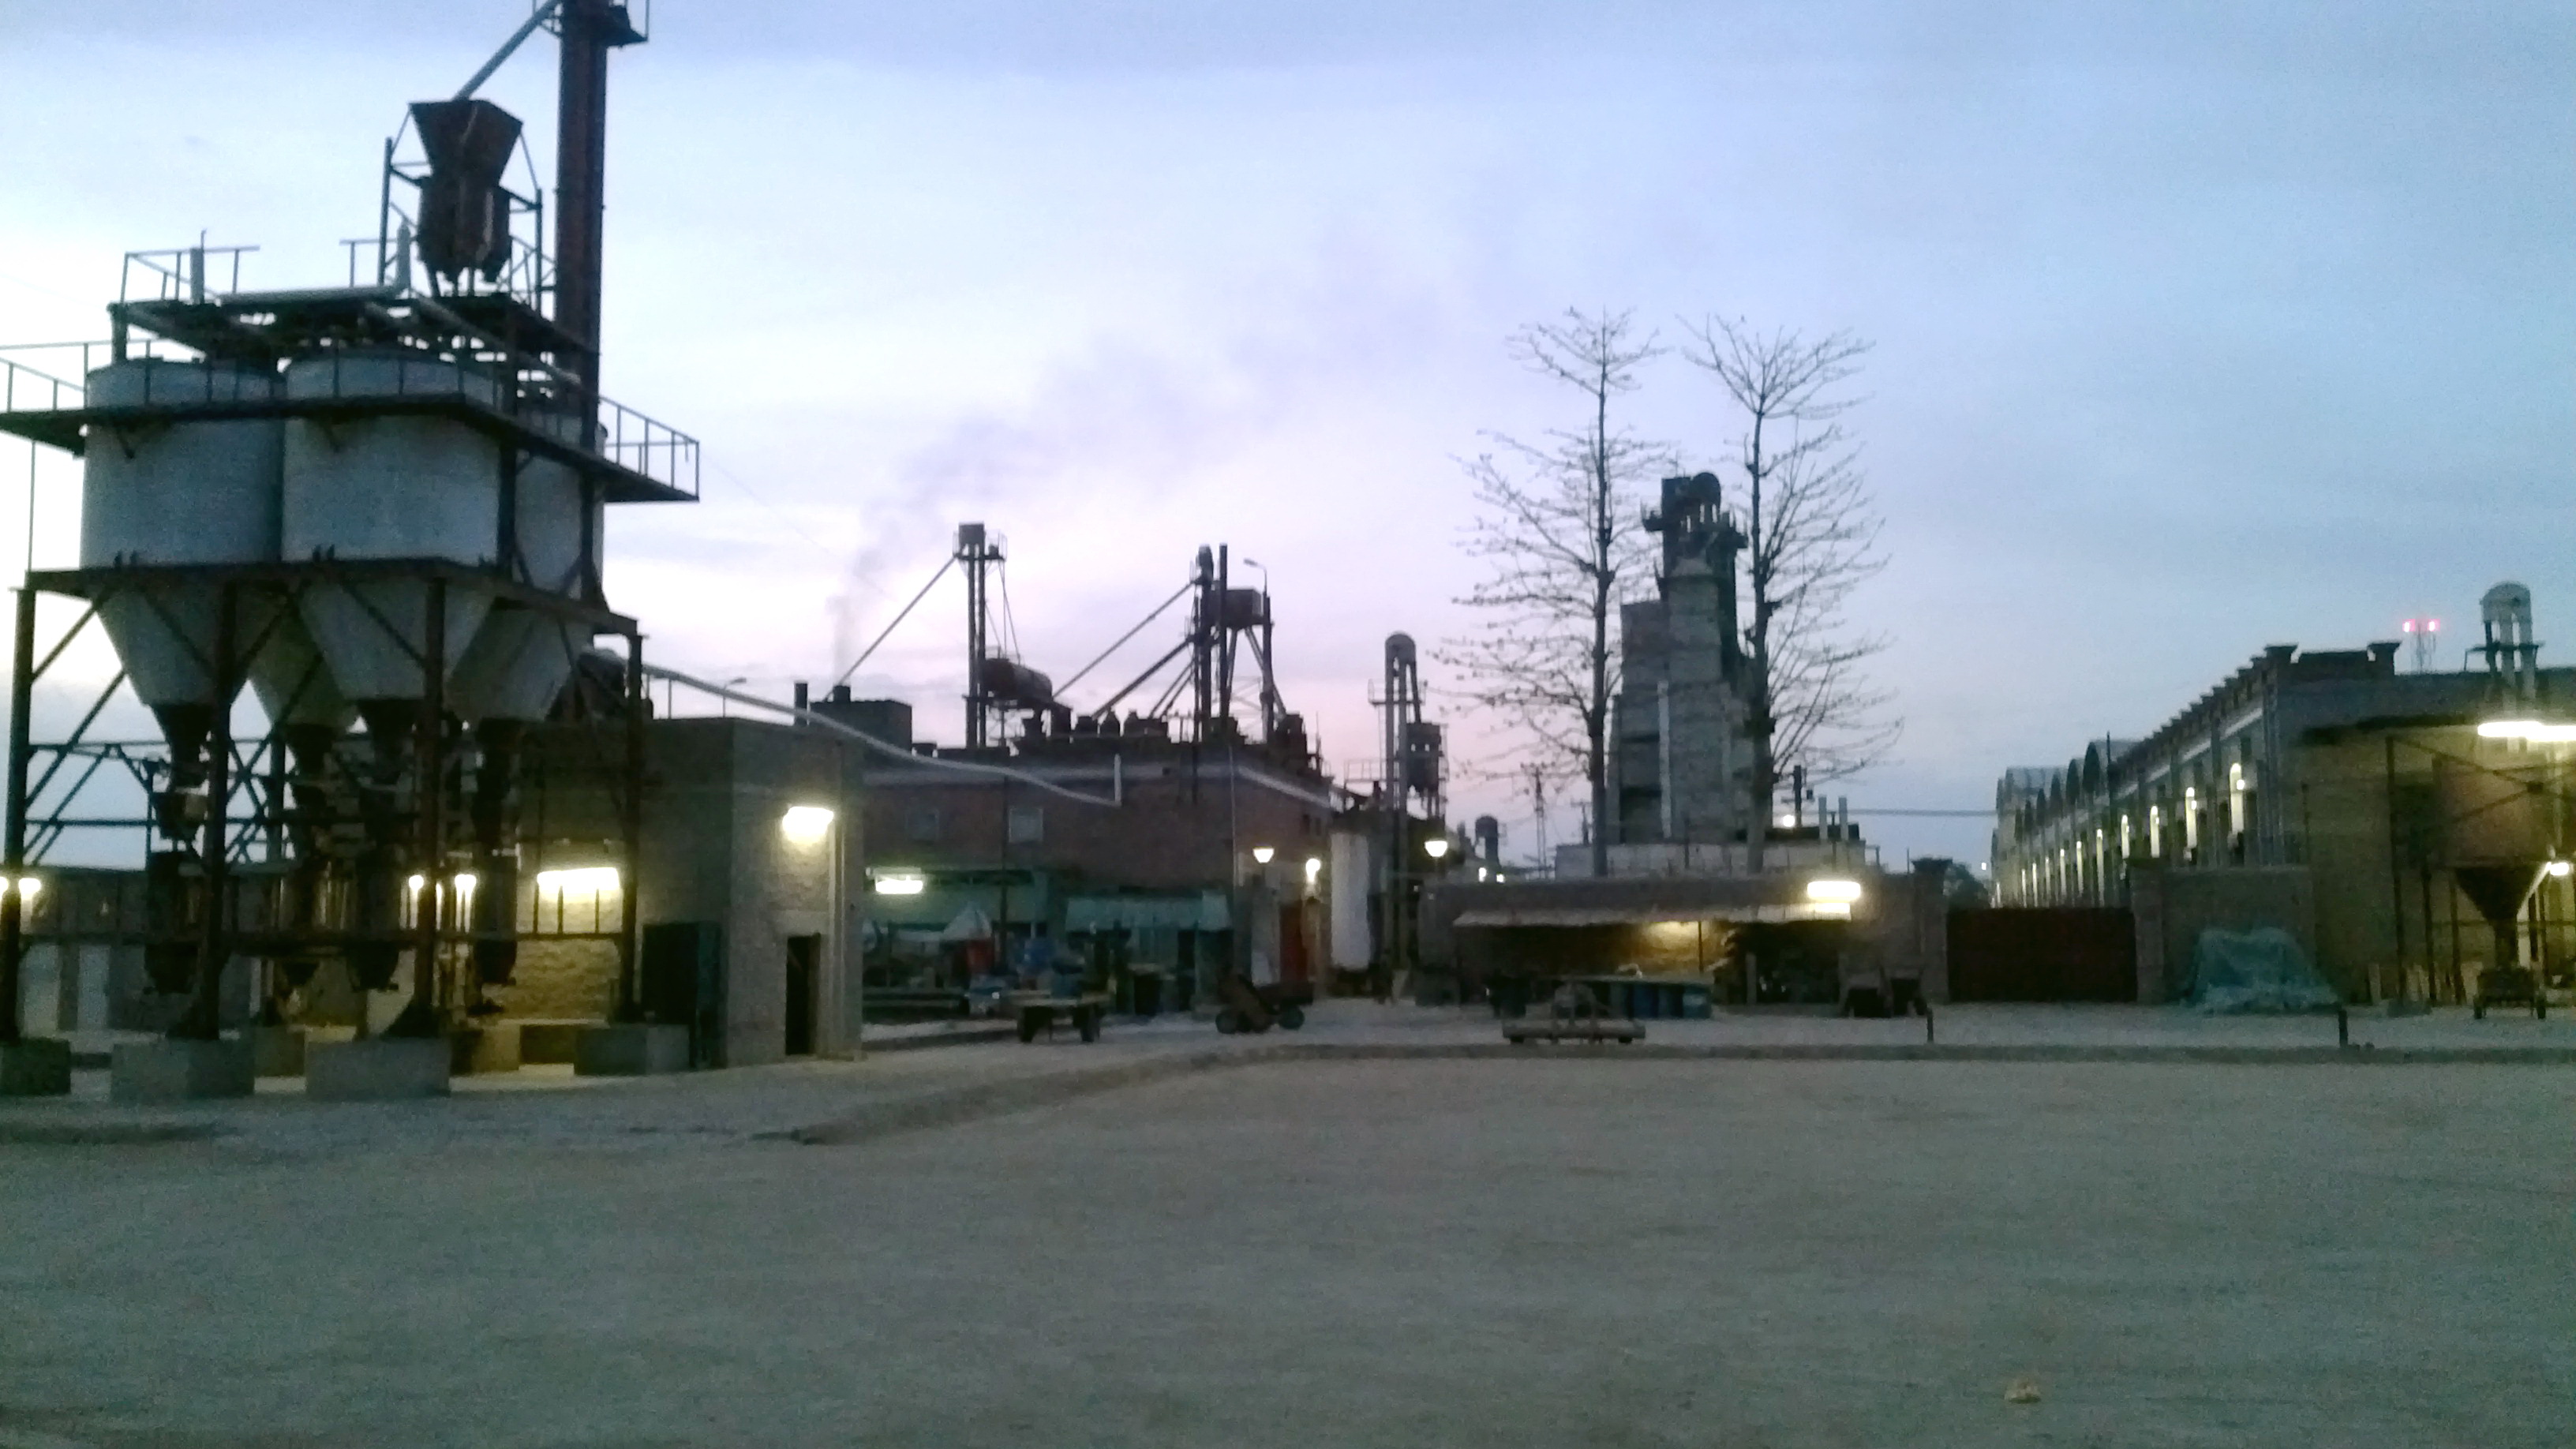 Evening view of the Mills